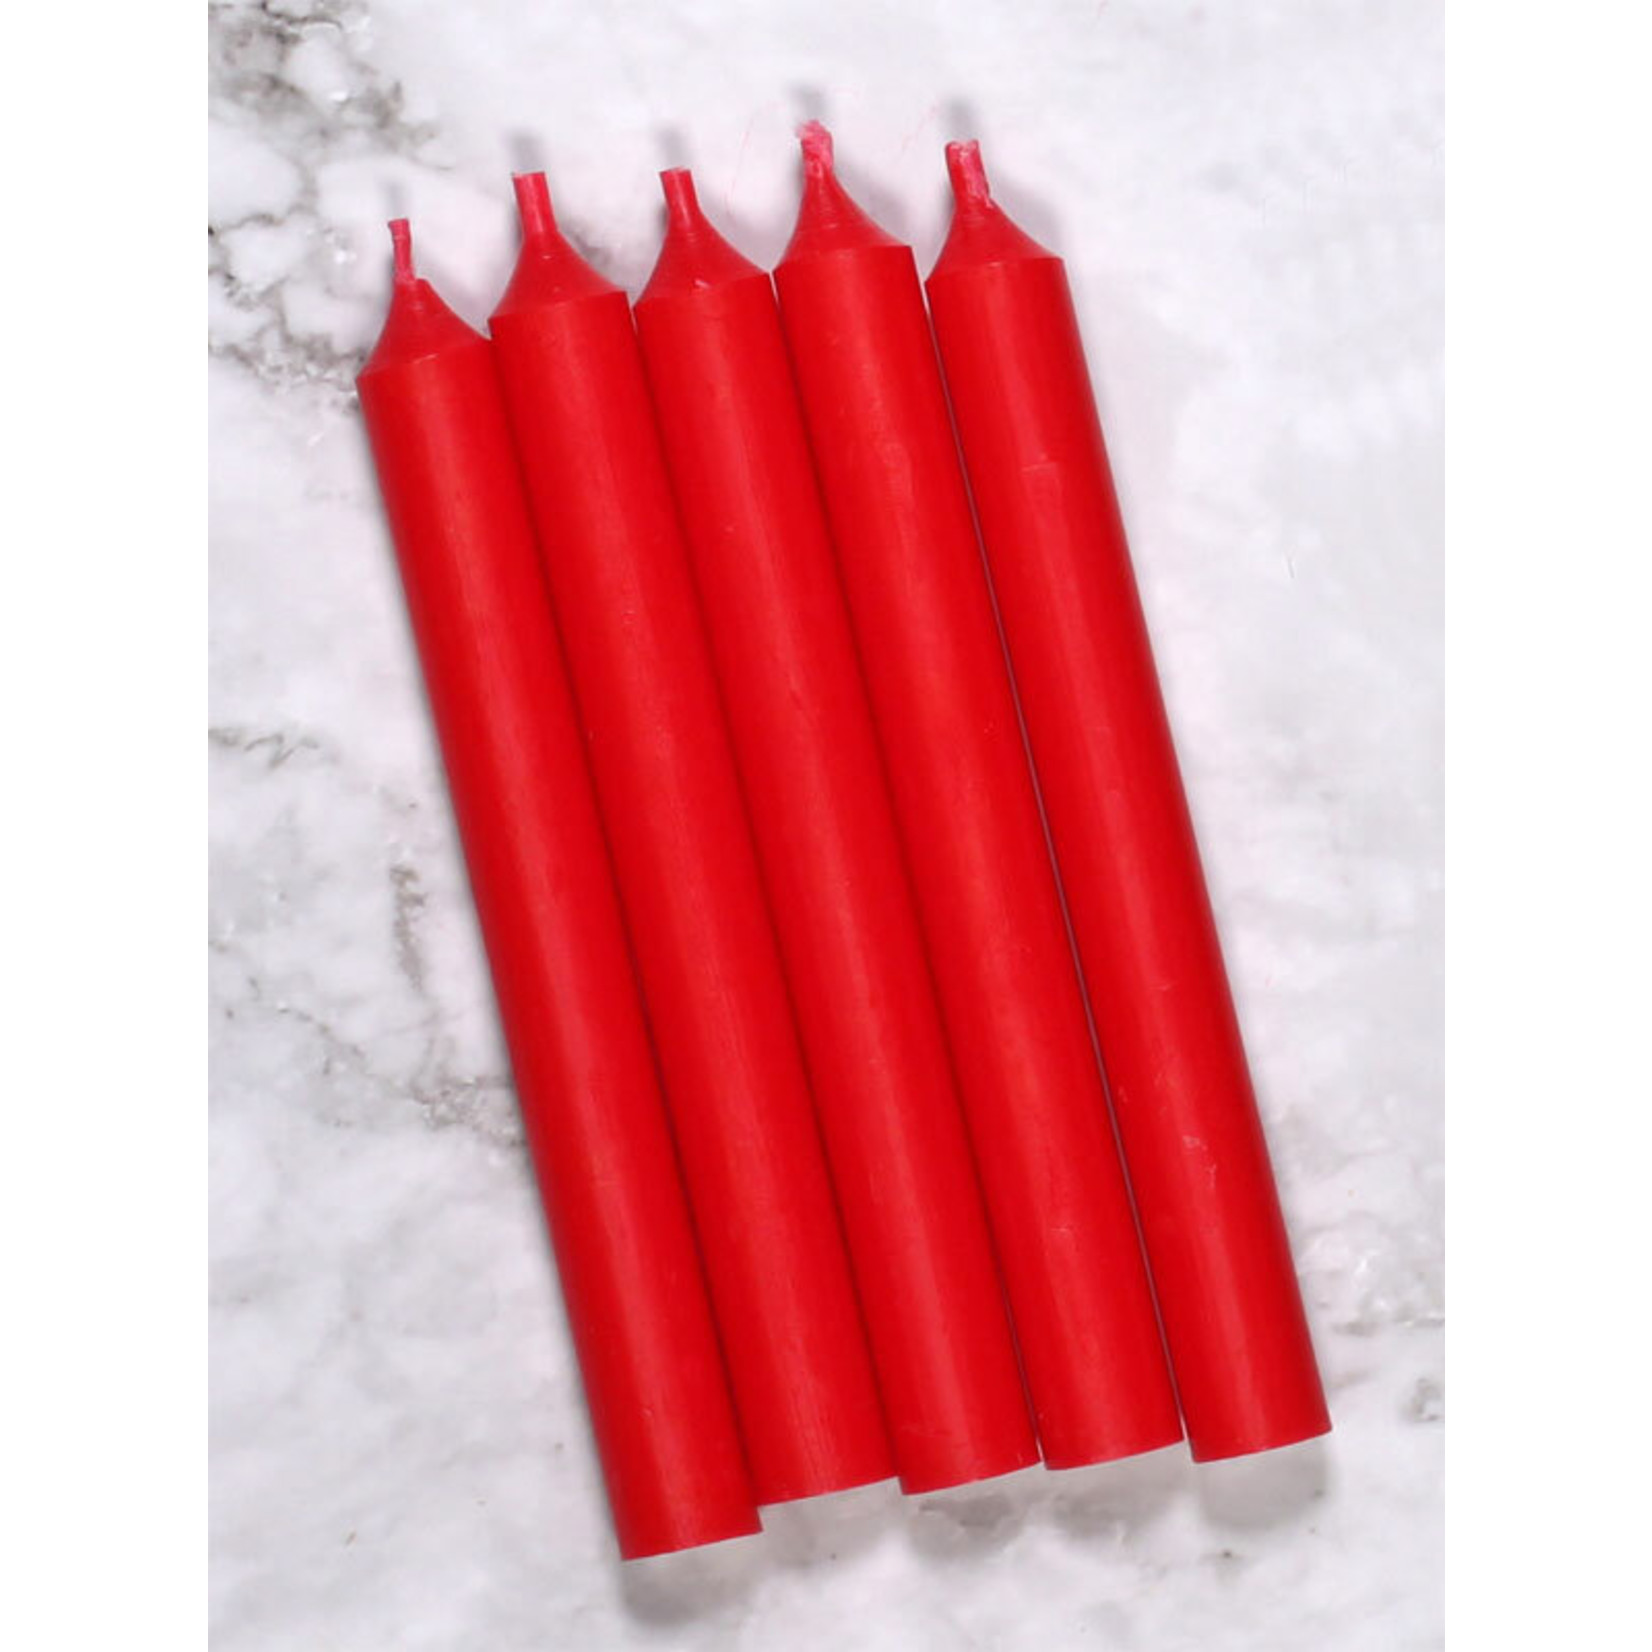 Twilight Collection Red Mini Candles - 12 Pack